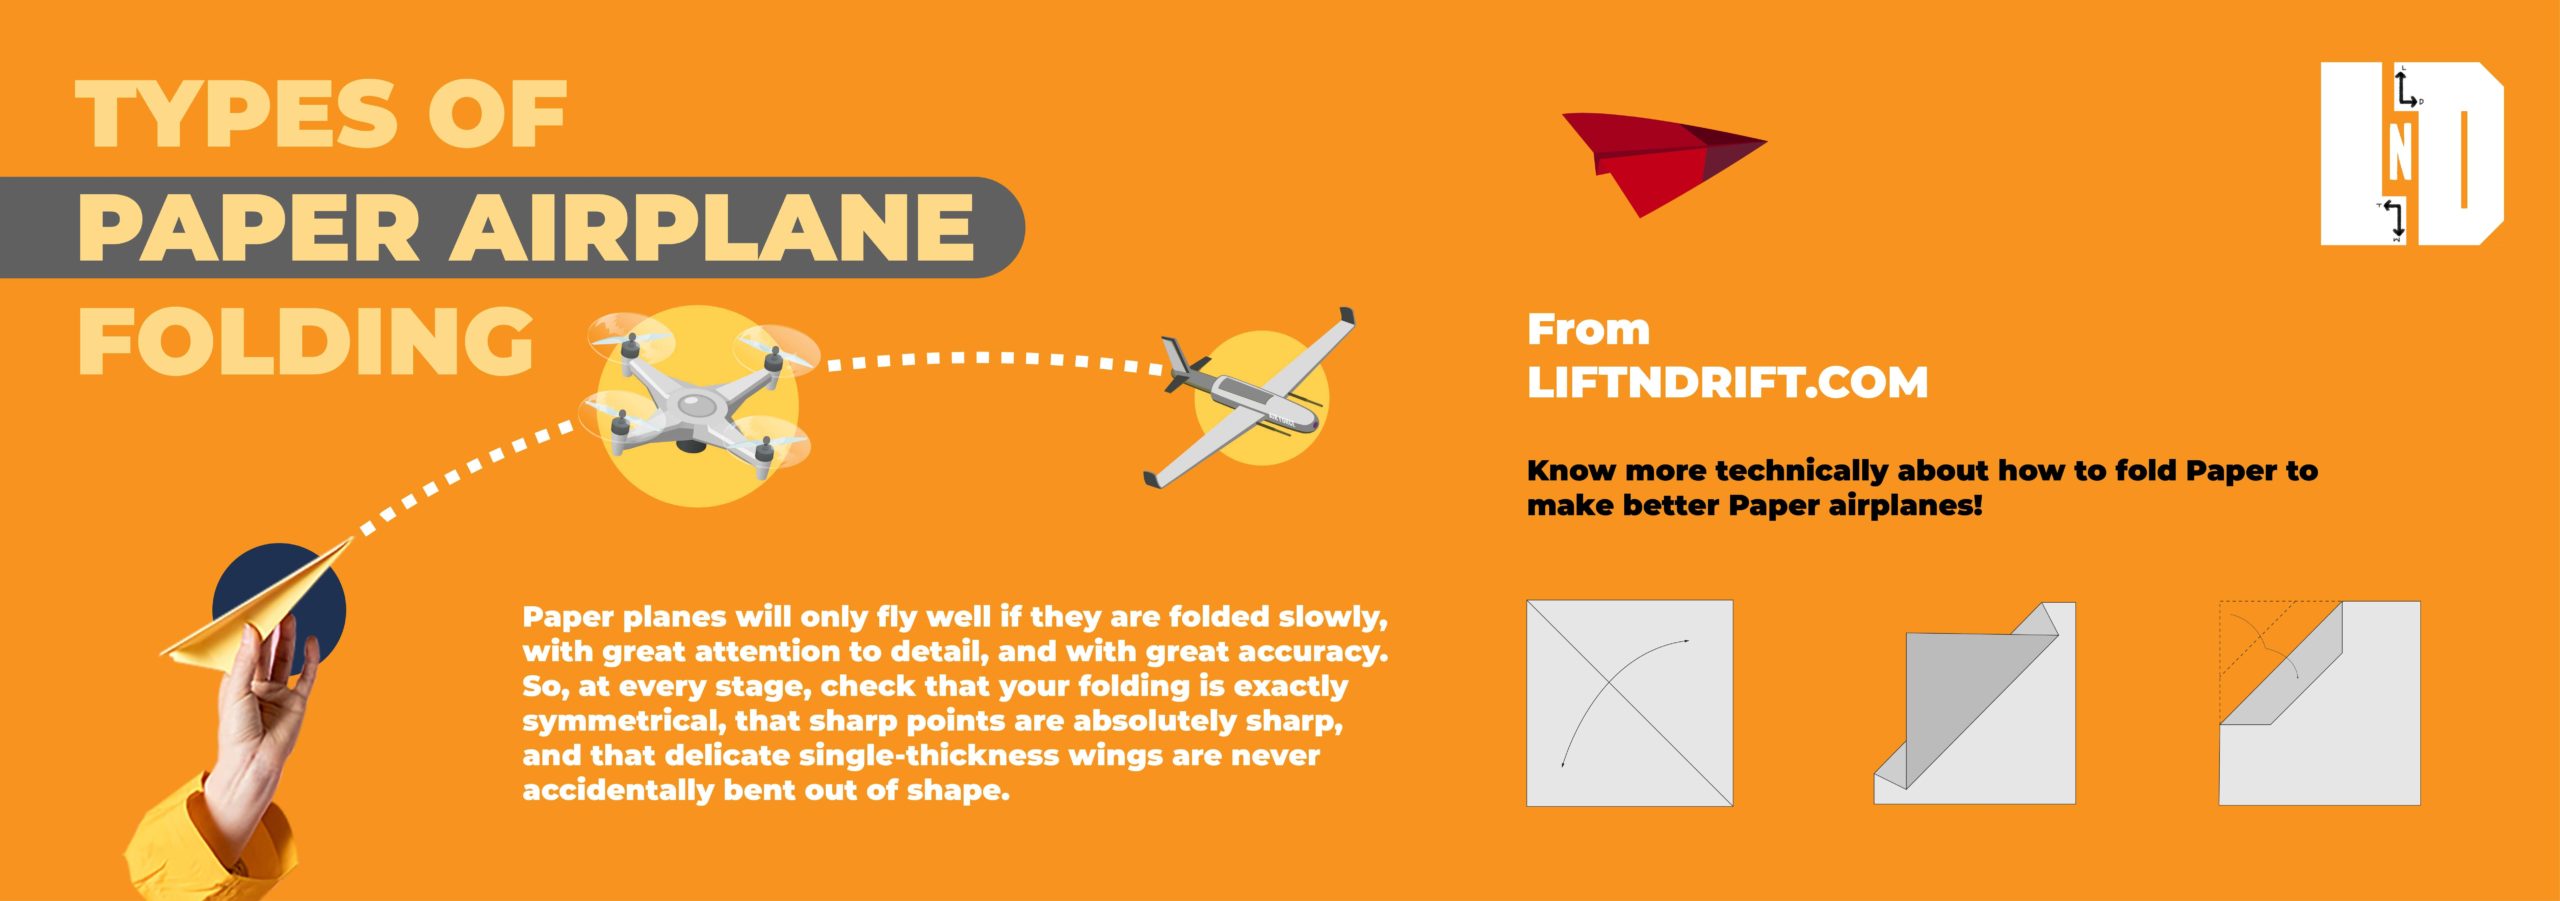 Types of paper airplane foldings